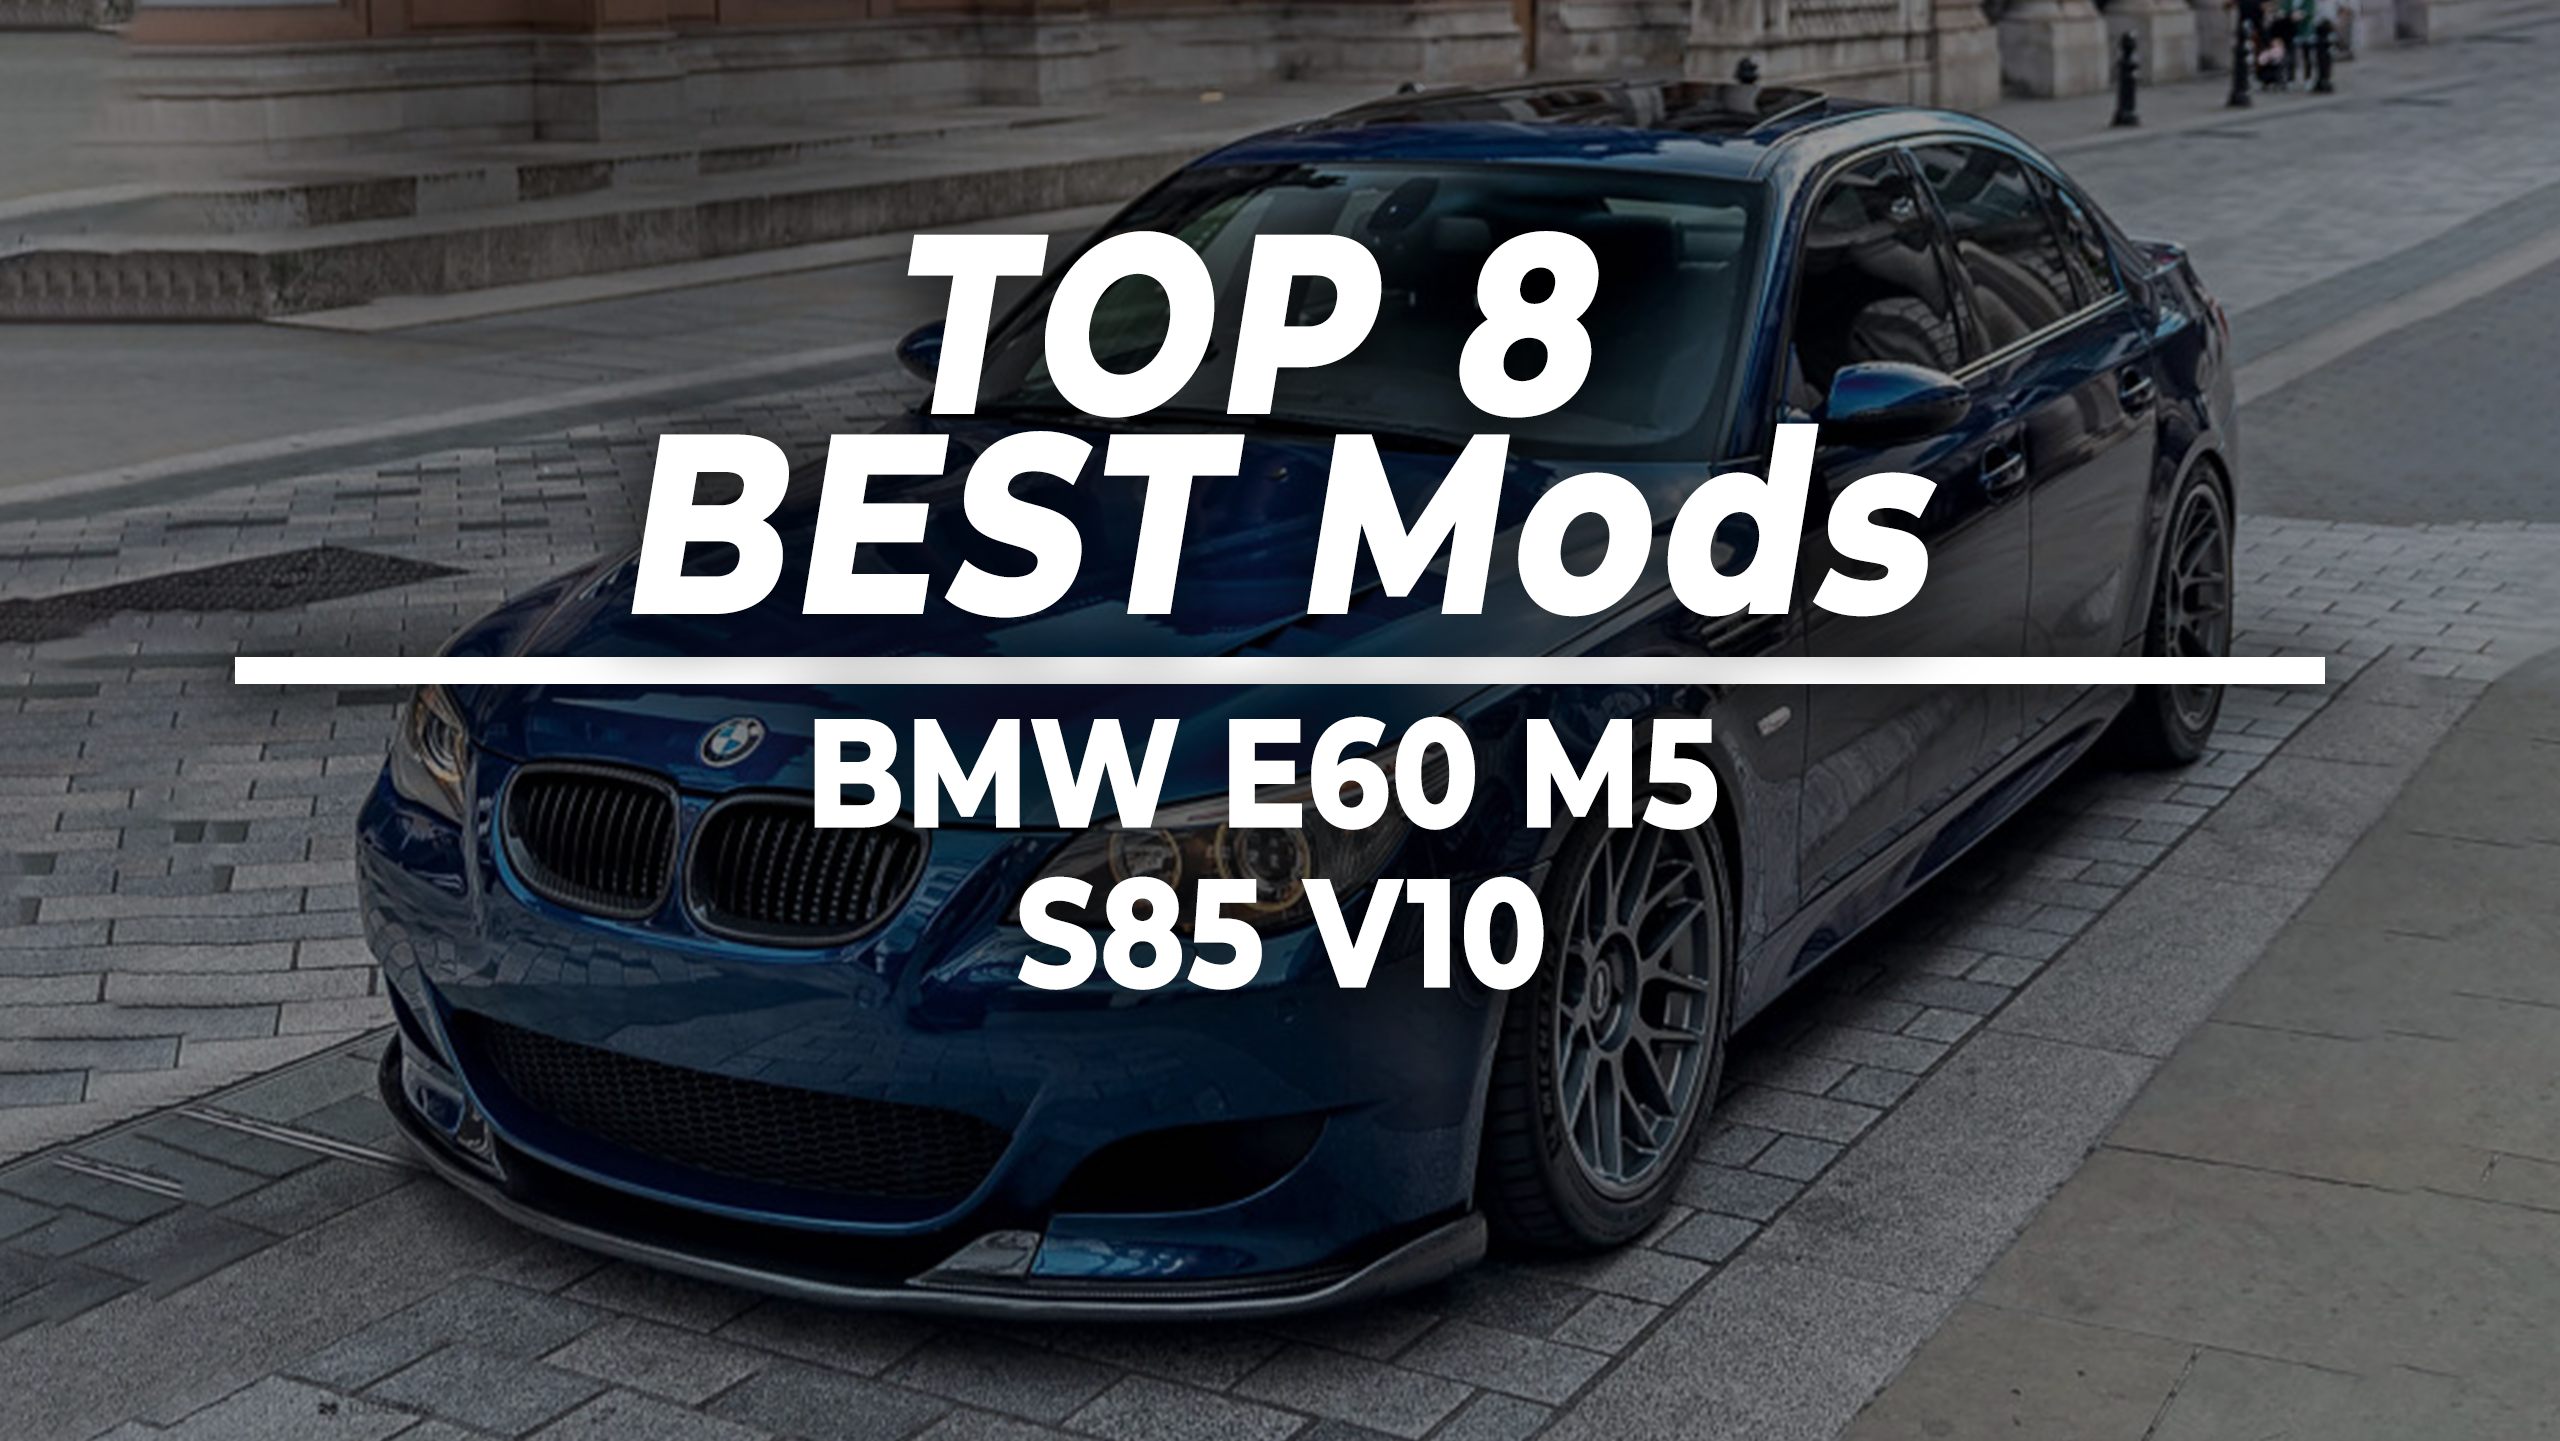 Top 8 Best Modifications For The BMW E60 M5 – Vivid Racing News